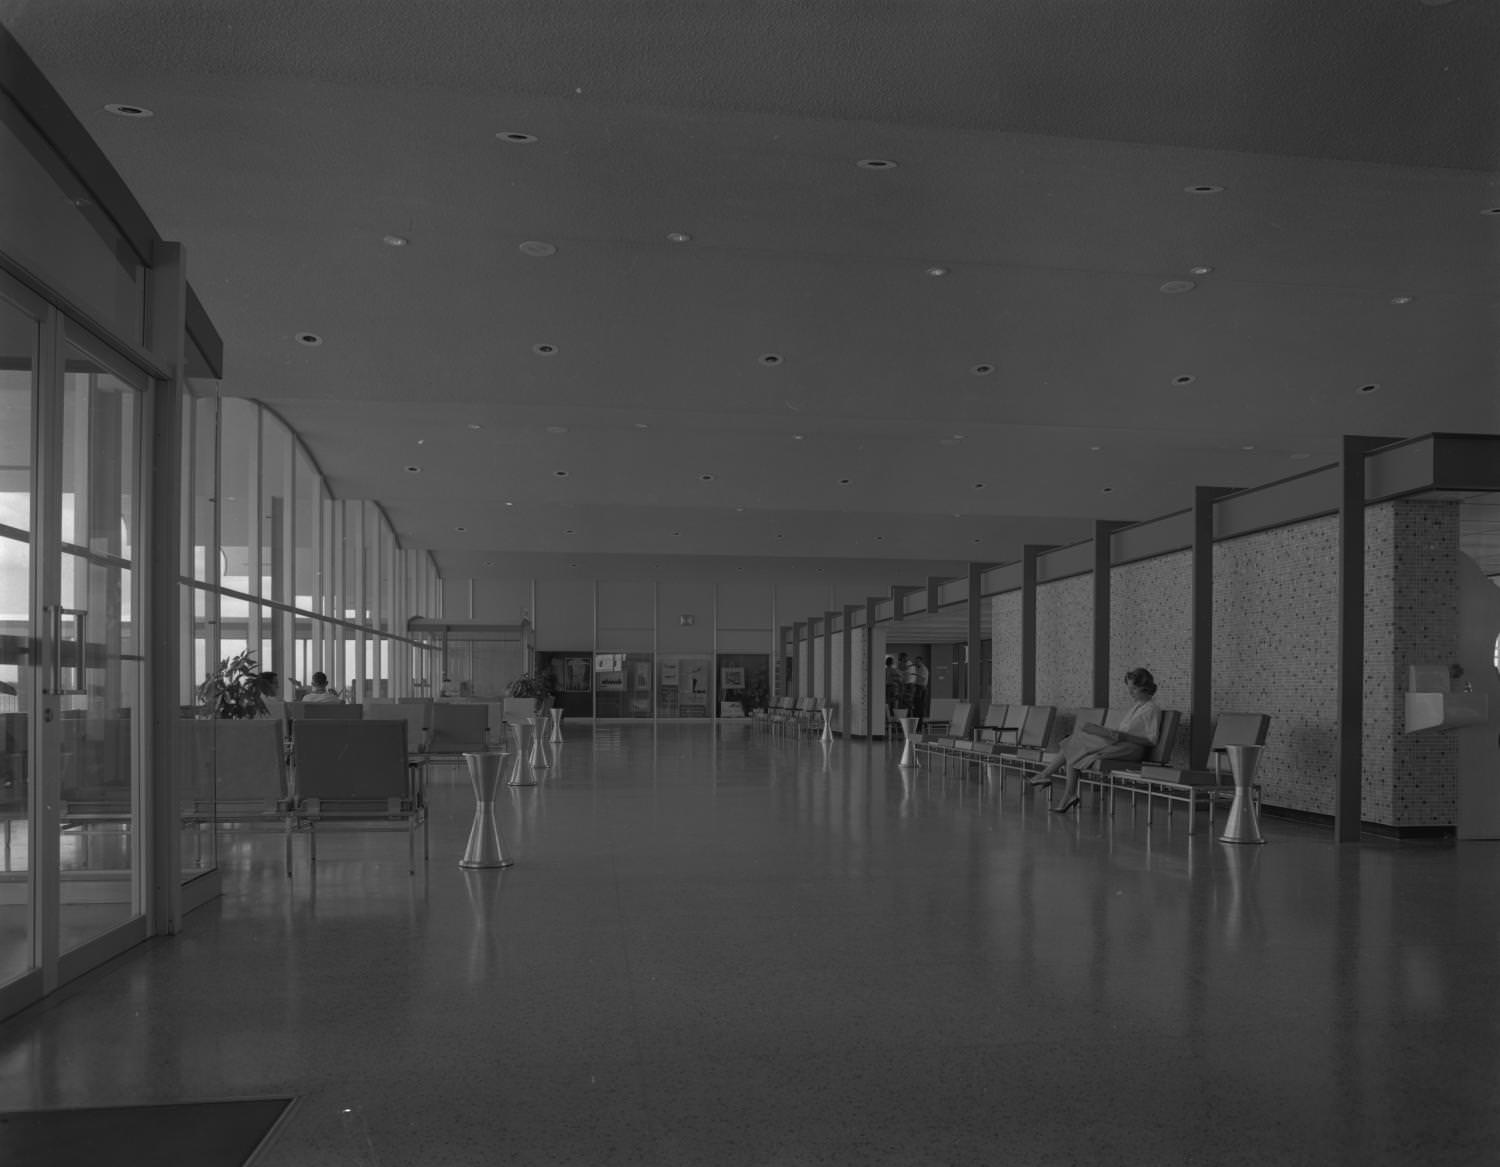 Interior of the Austin Municipal Airport where an open corridor can be seen with seating areas to the left and right, 1961